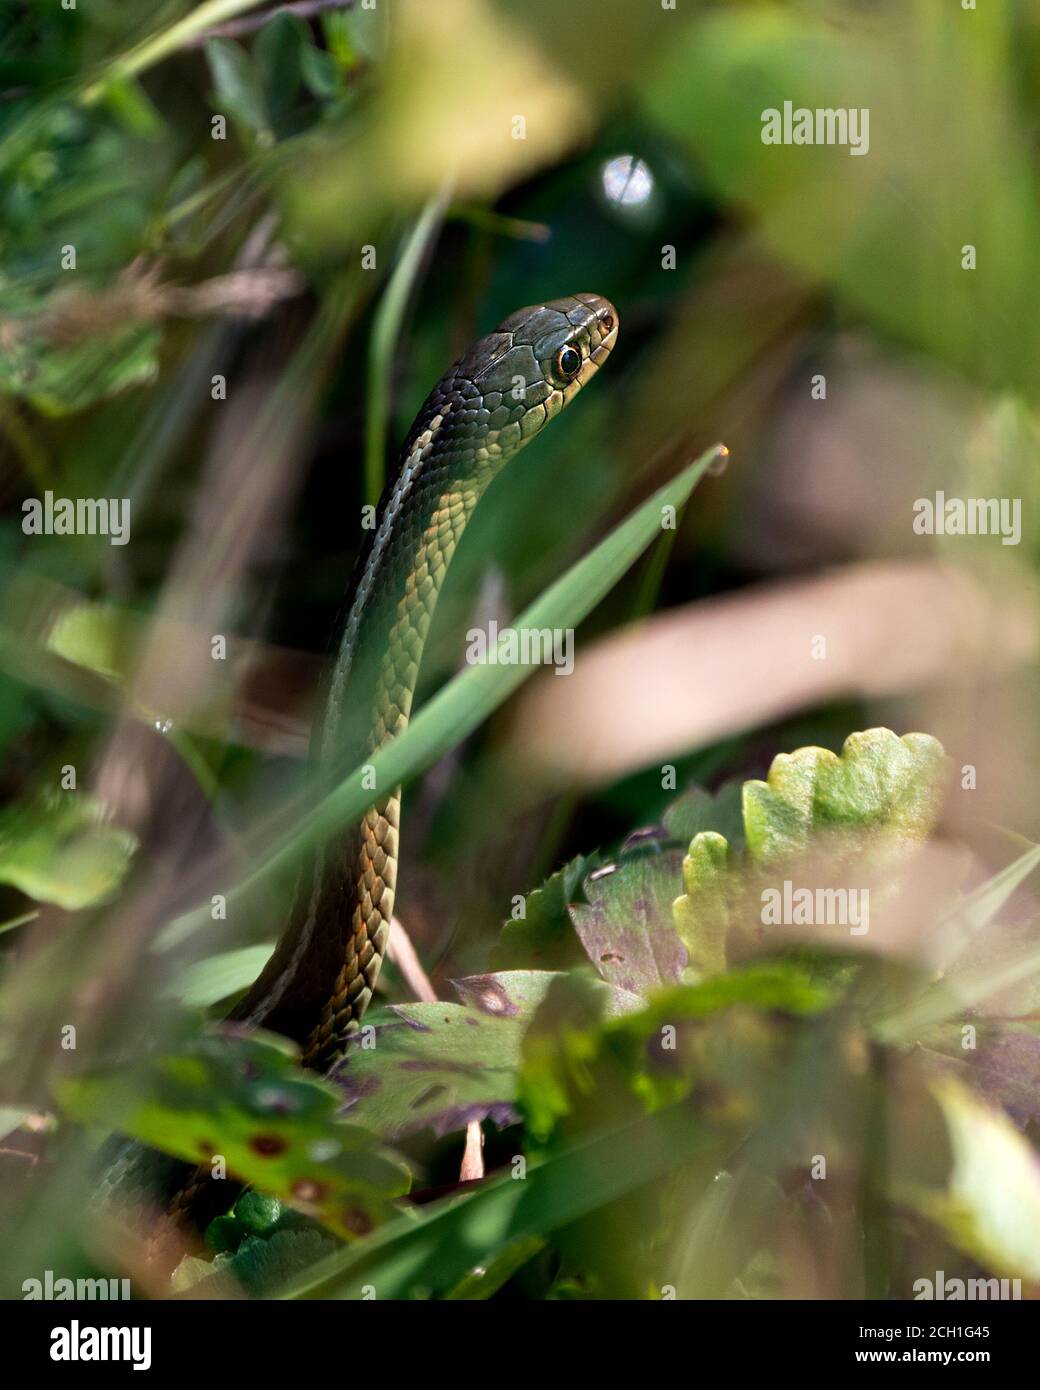 Snake head close-up profile view with foreground and background of foliage in its environment and habitat basking in sunlight. Stock Photo